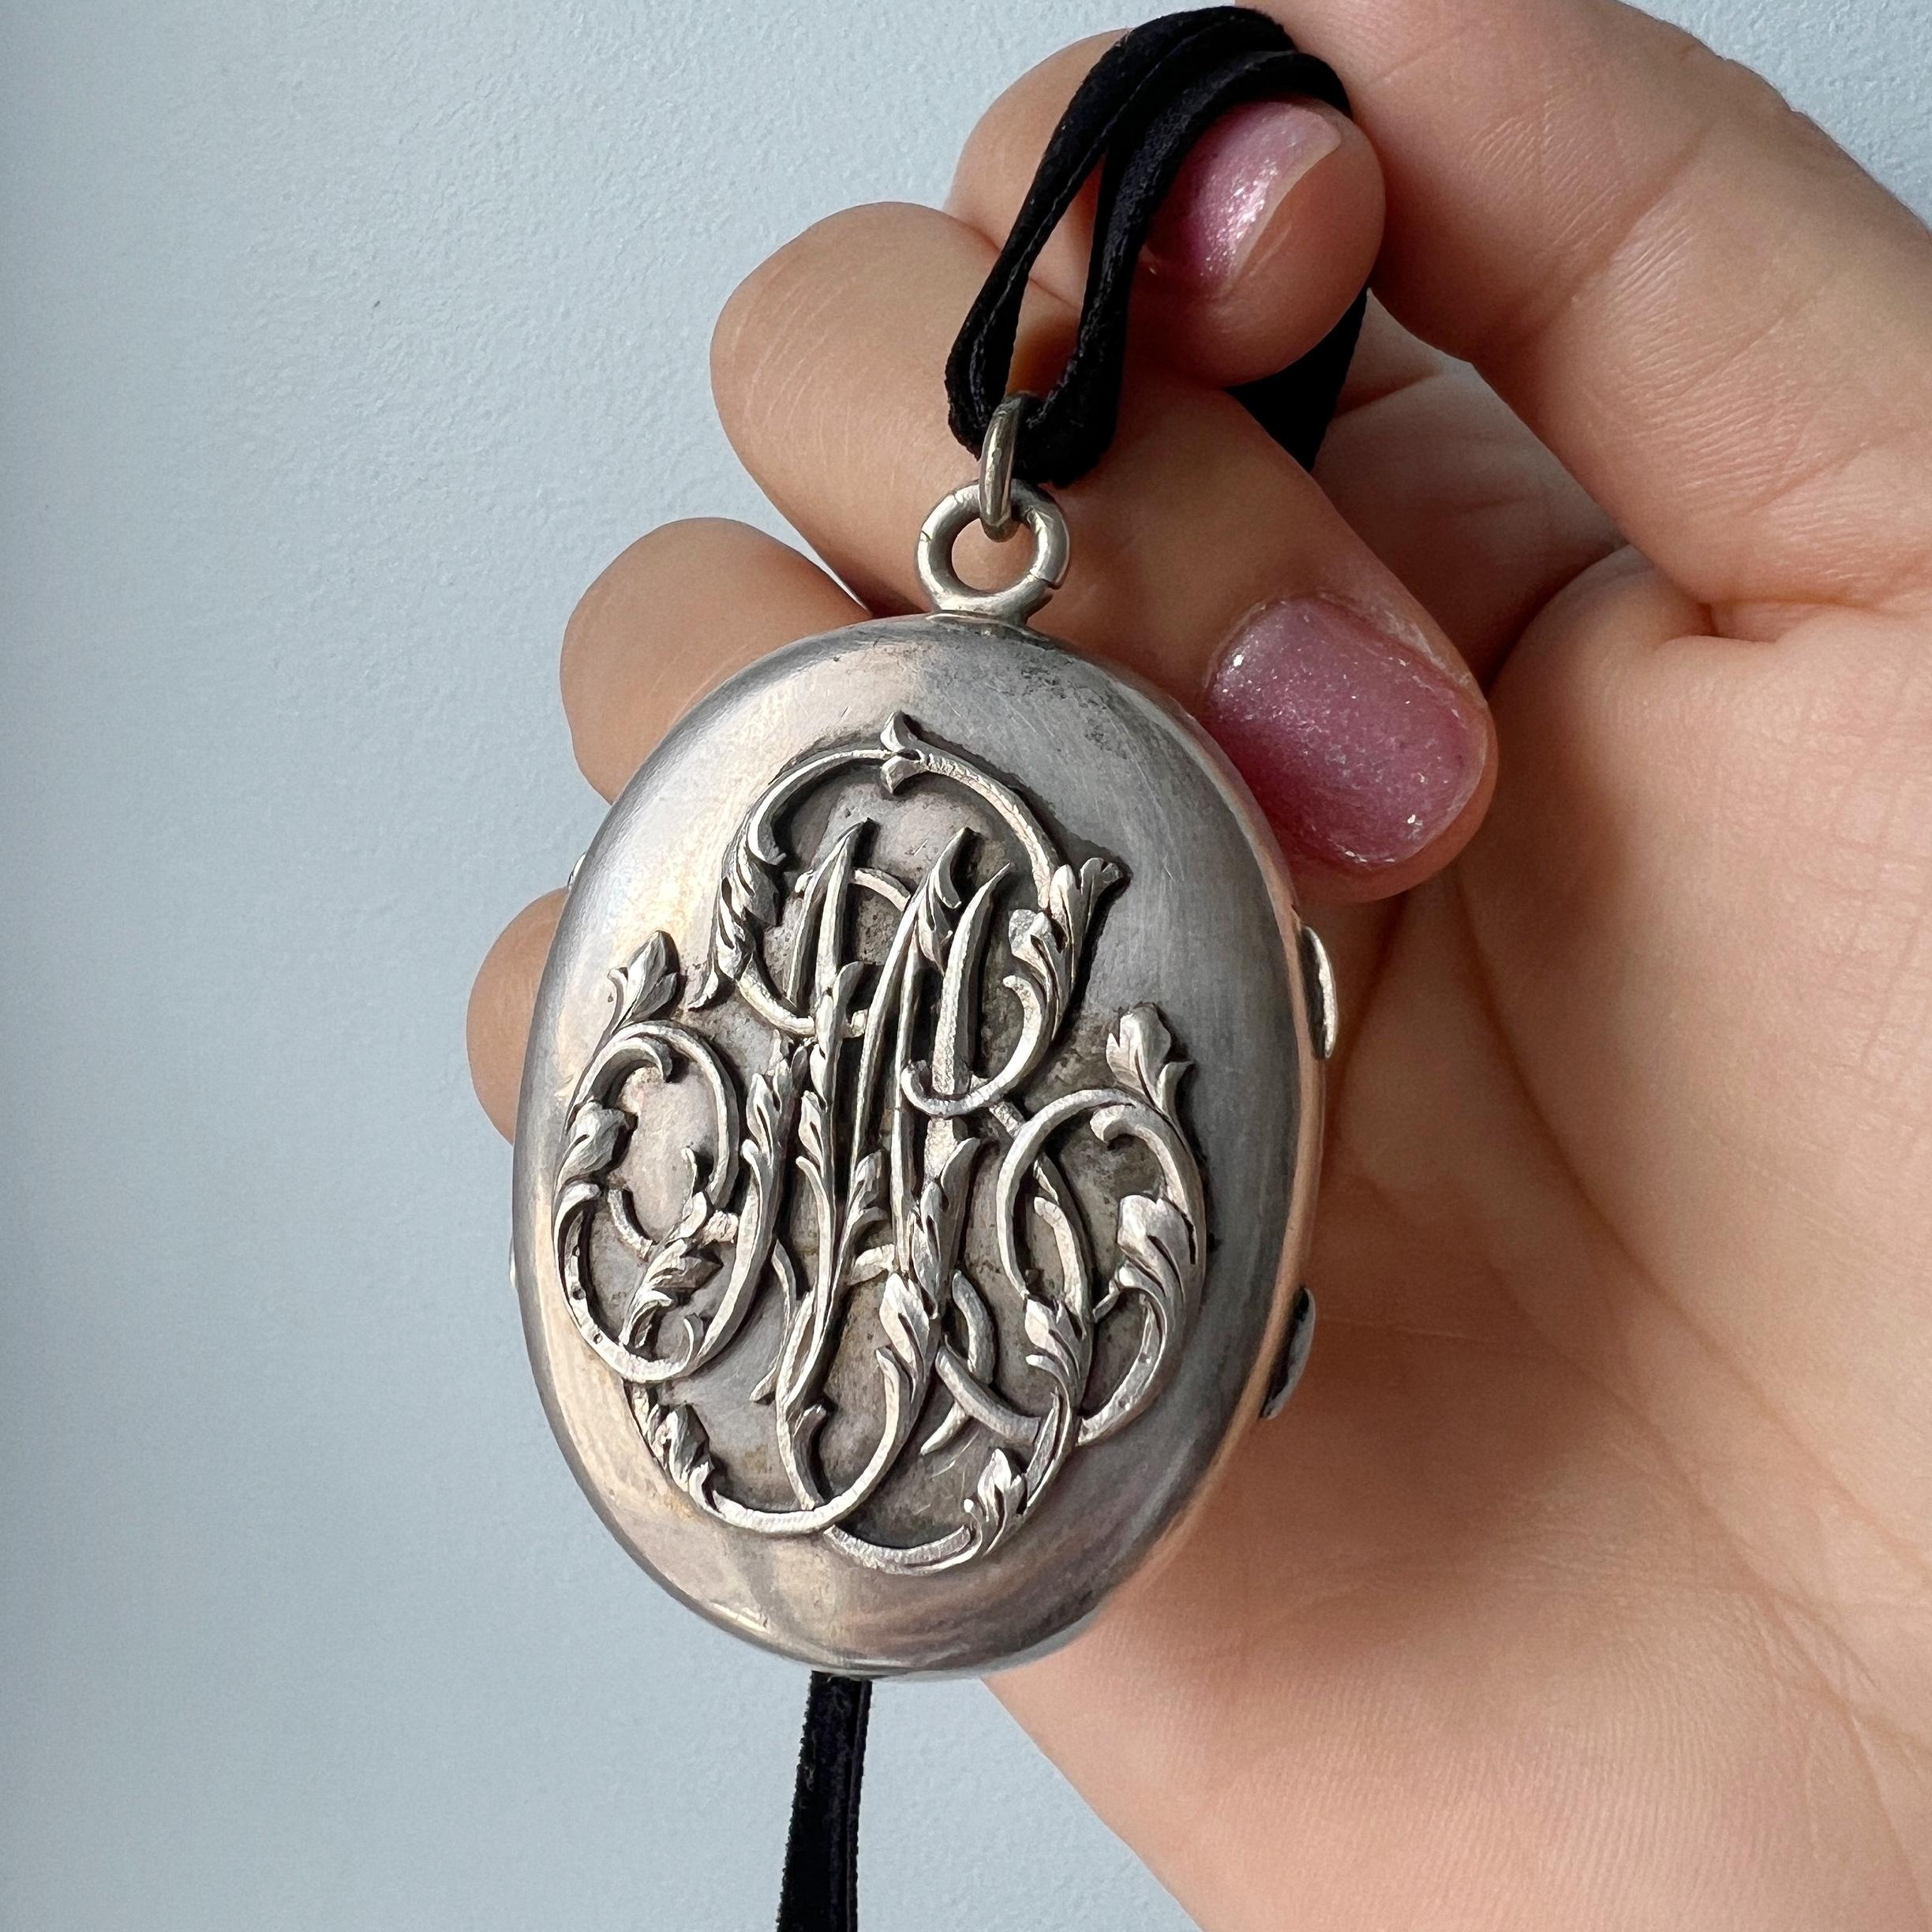 Elegance meets sentimentality in this exquisite silver locket pendant. As a symbol of personalized refinement, this locket features a beautifully rendered monogram of the letter 